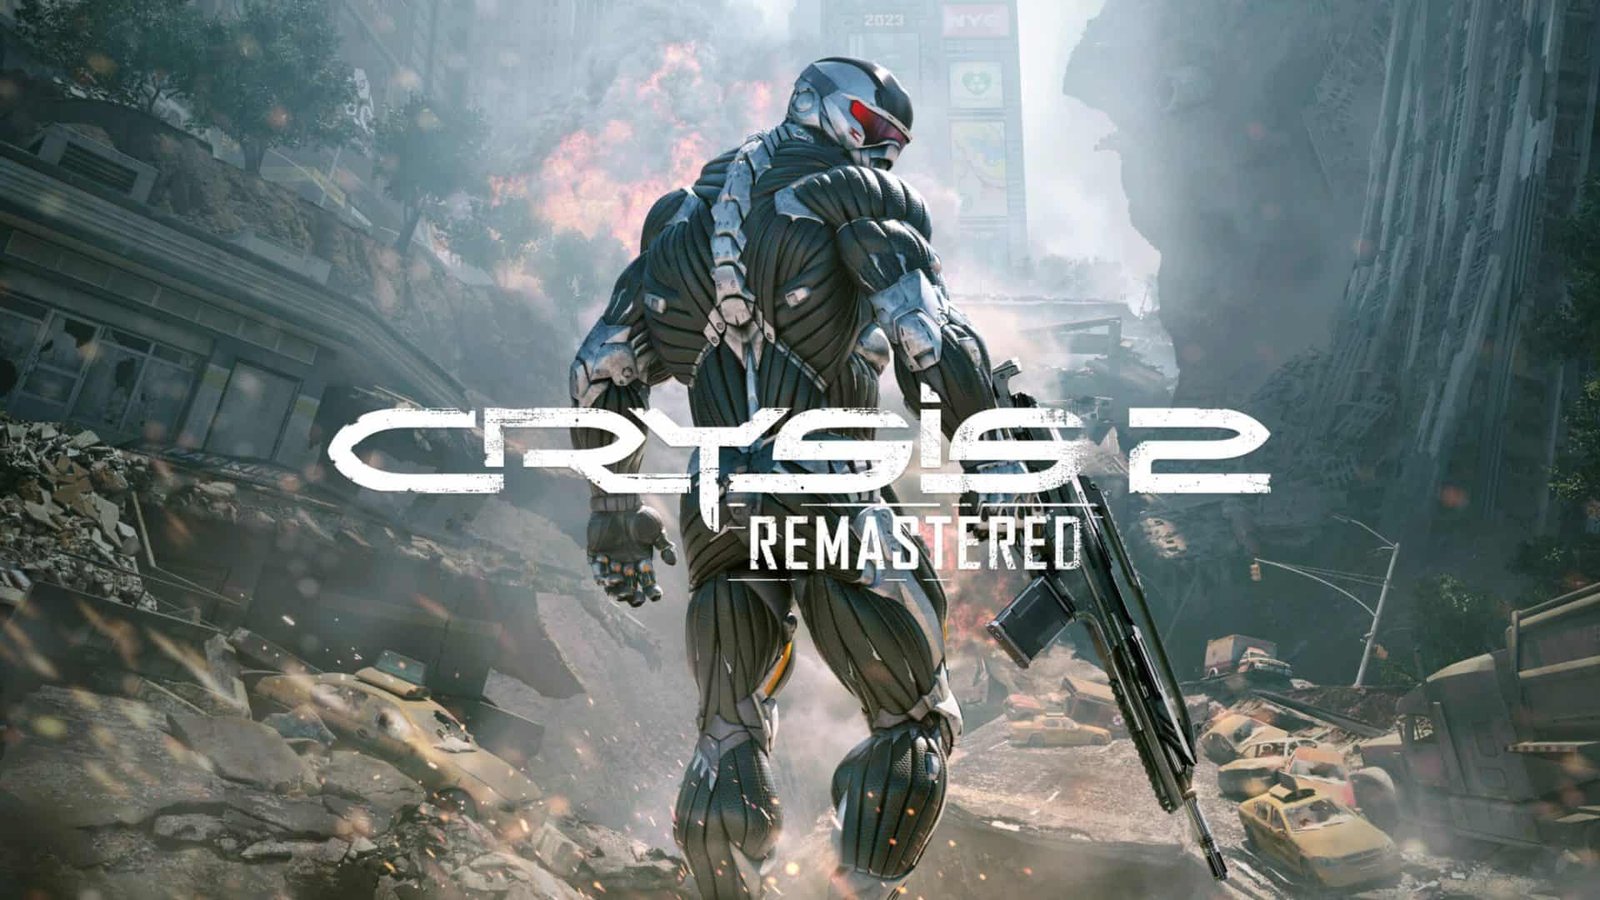 Here’s the detailed feature list of the upcoming Crysis Remastered Trilogy